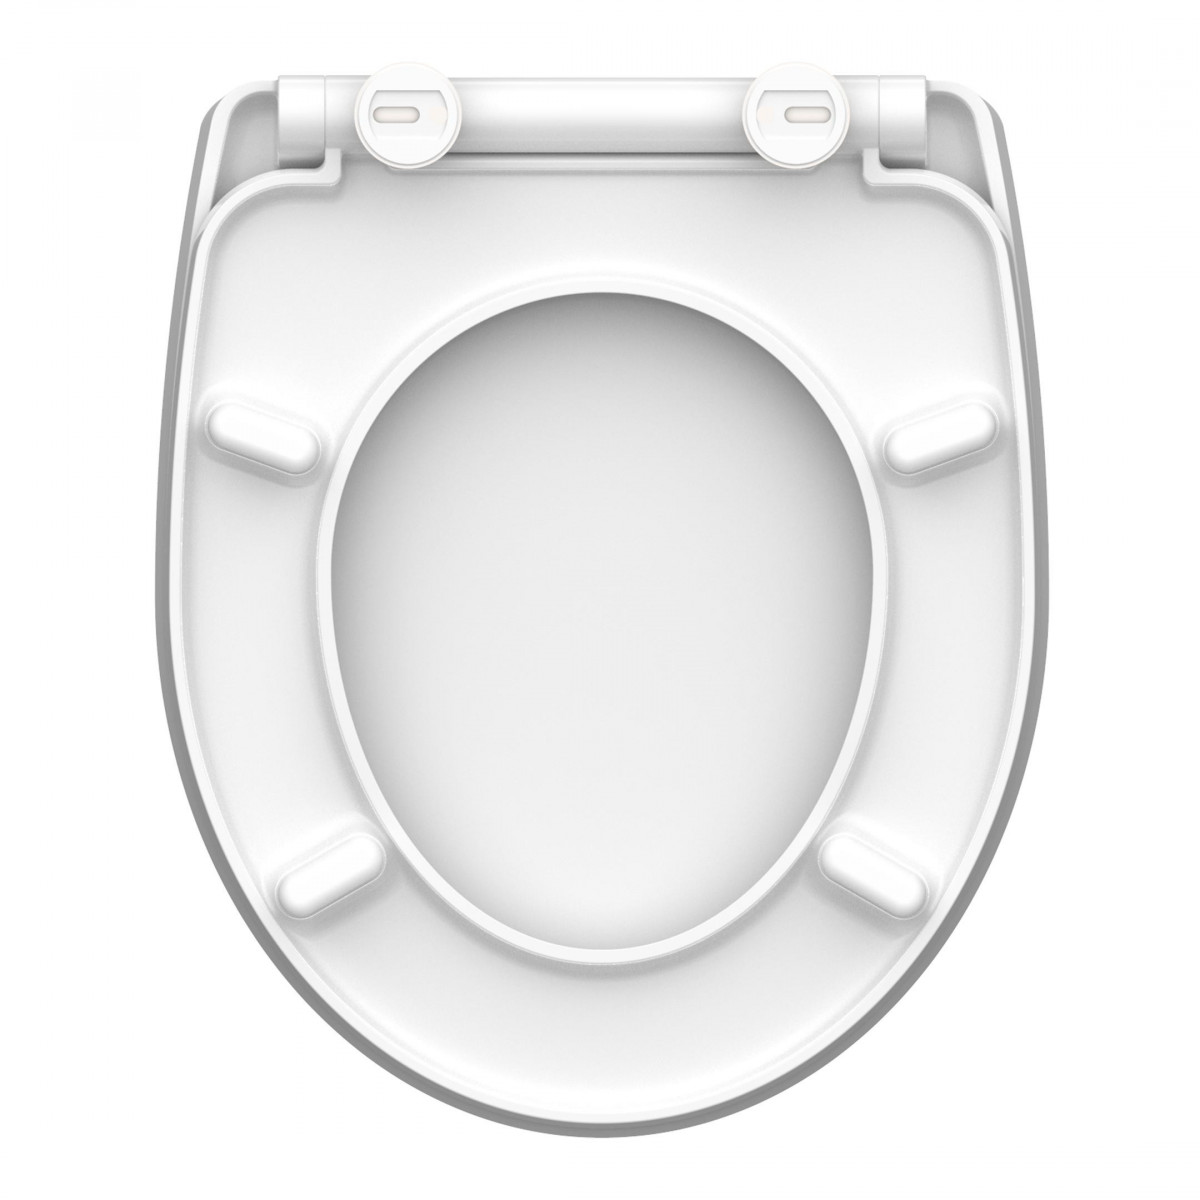 Duroplast HG Toilet Seat GRAZY SKULL with Soft Close and Quick Release